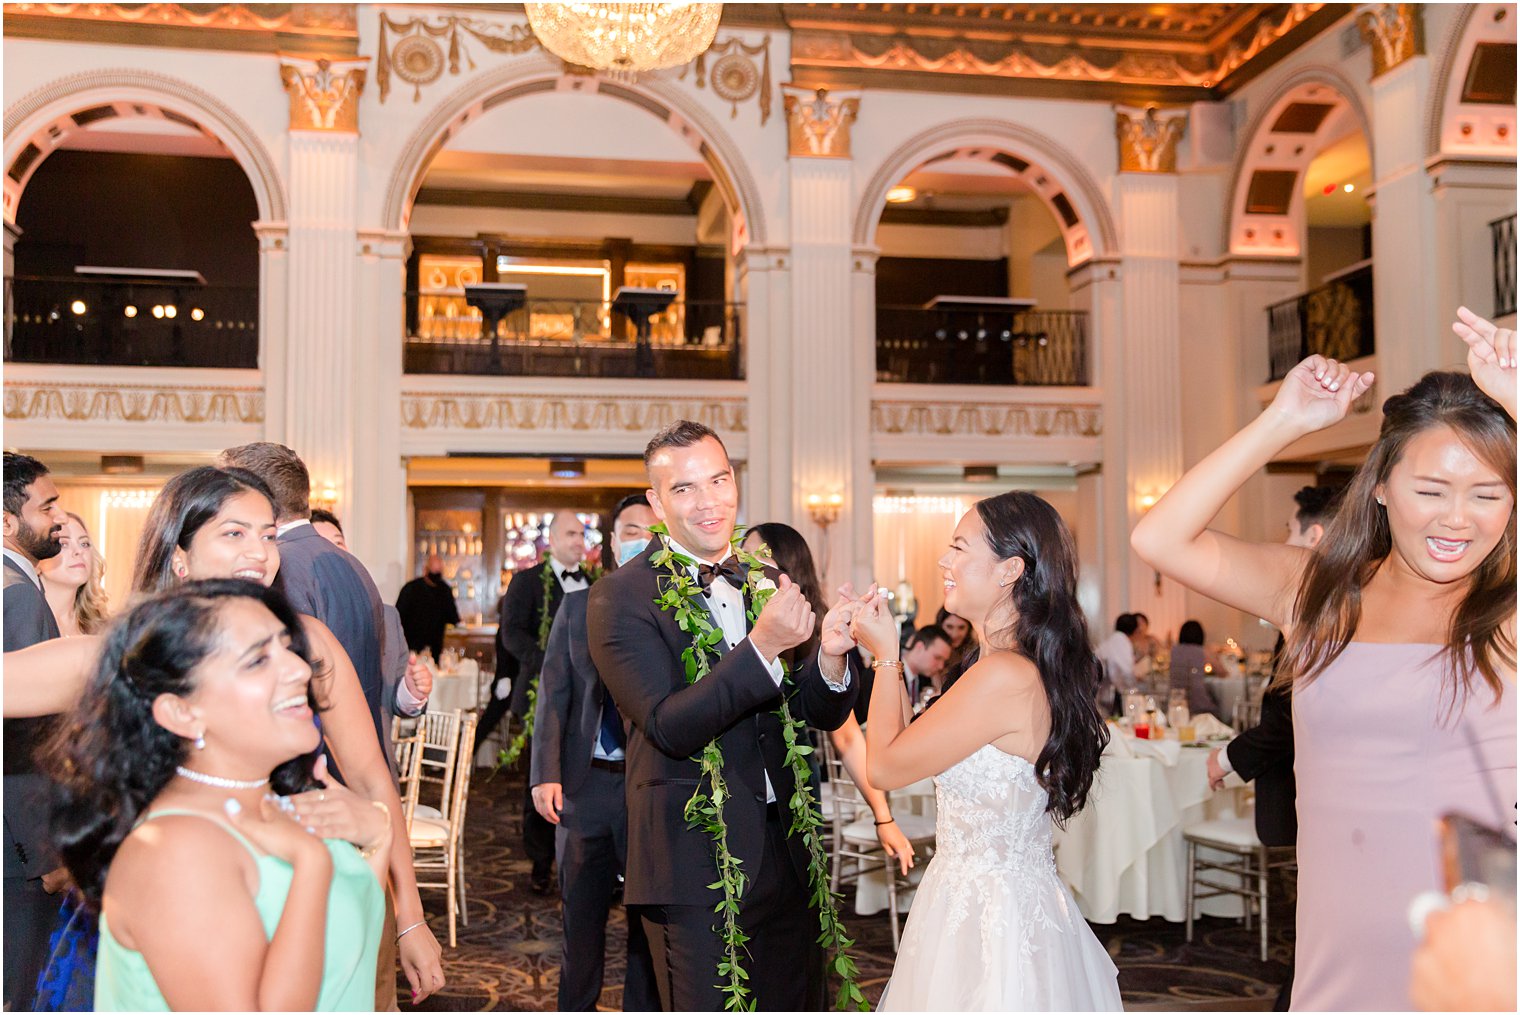 groom dances with bride during wedding reception at the Ballroom at the Ben